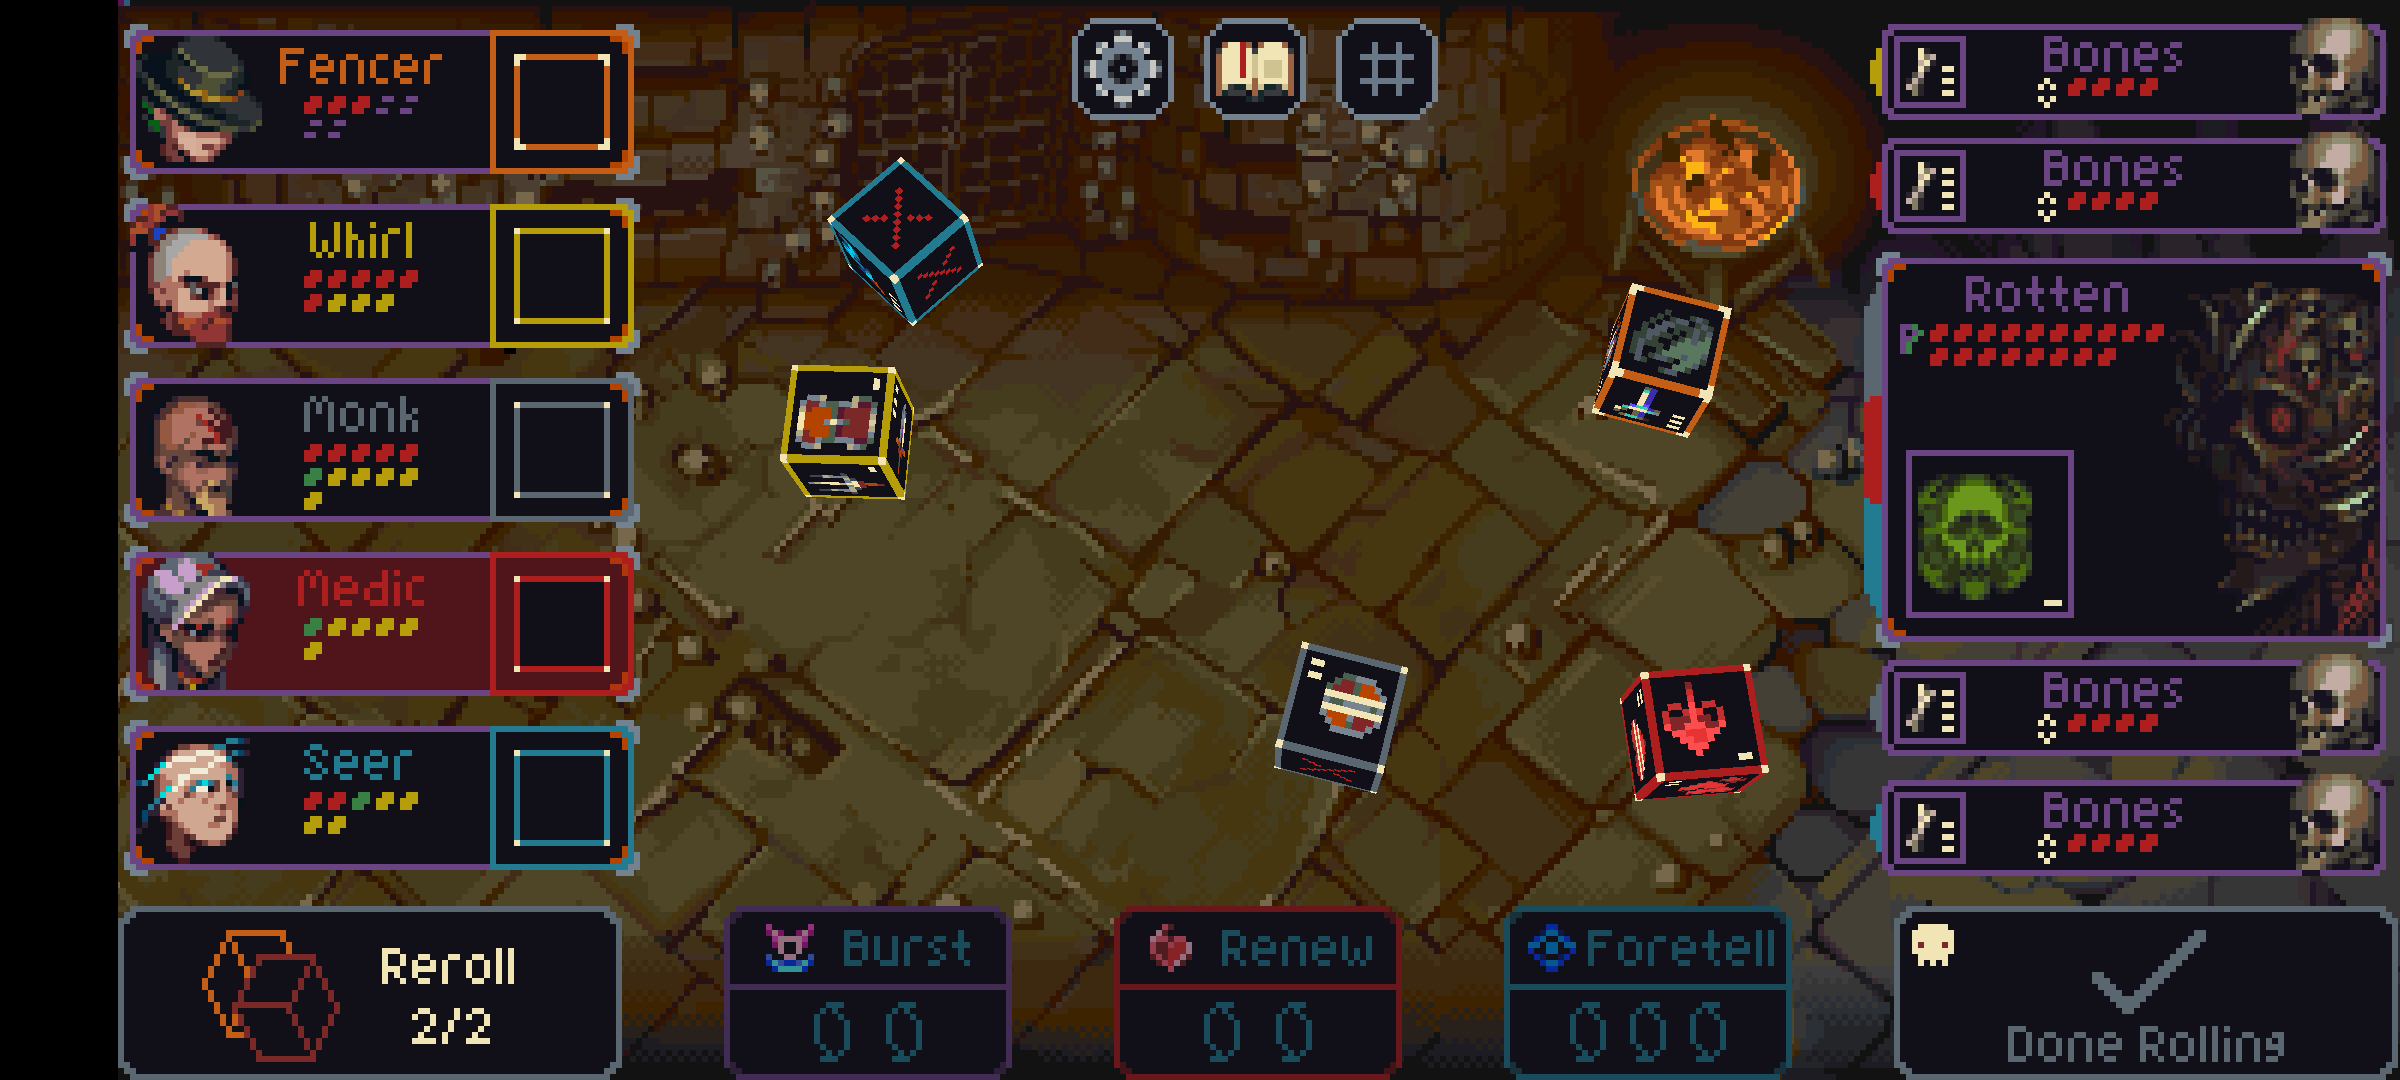 A pixelated dungeon crawling game on a phone, with character panels on the left, enemies on the right, and dice in the middle.